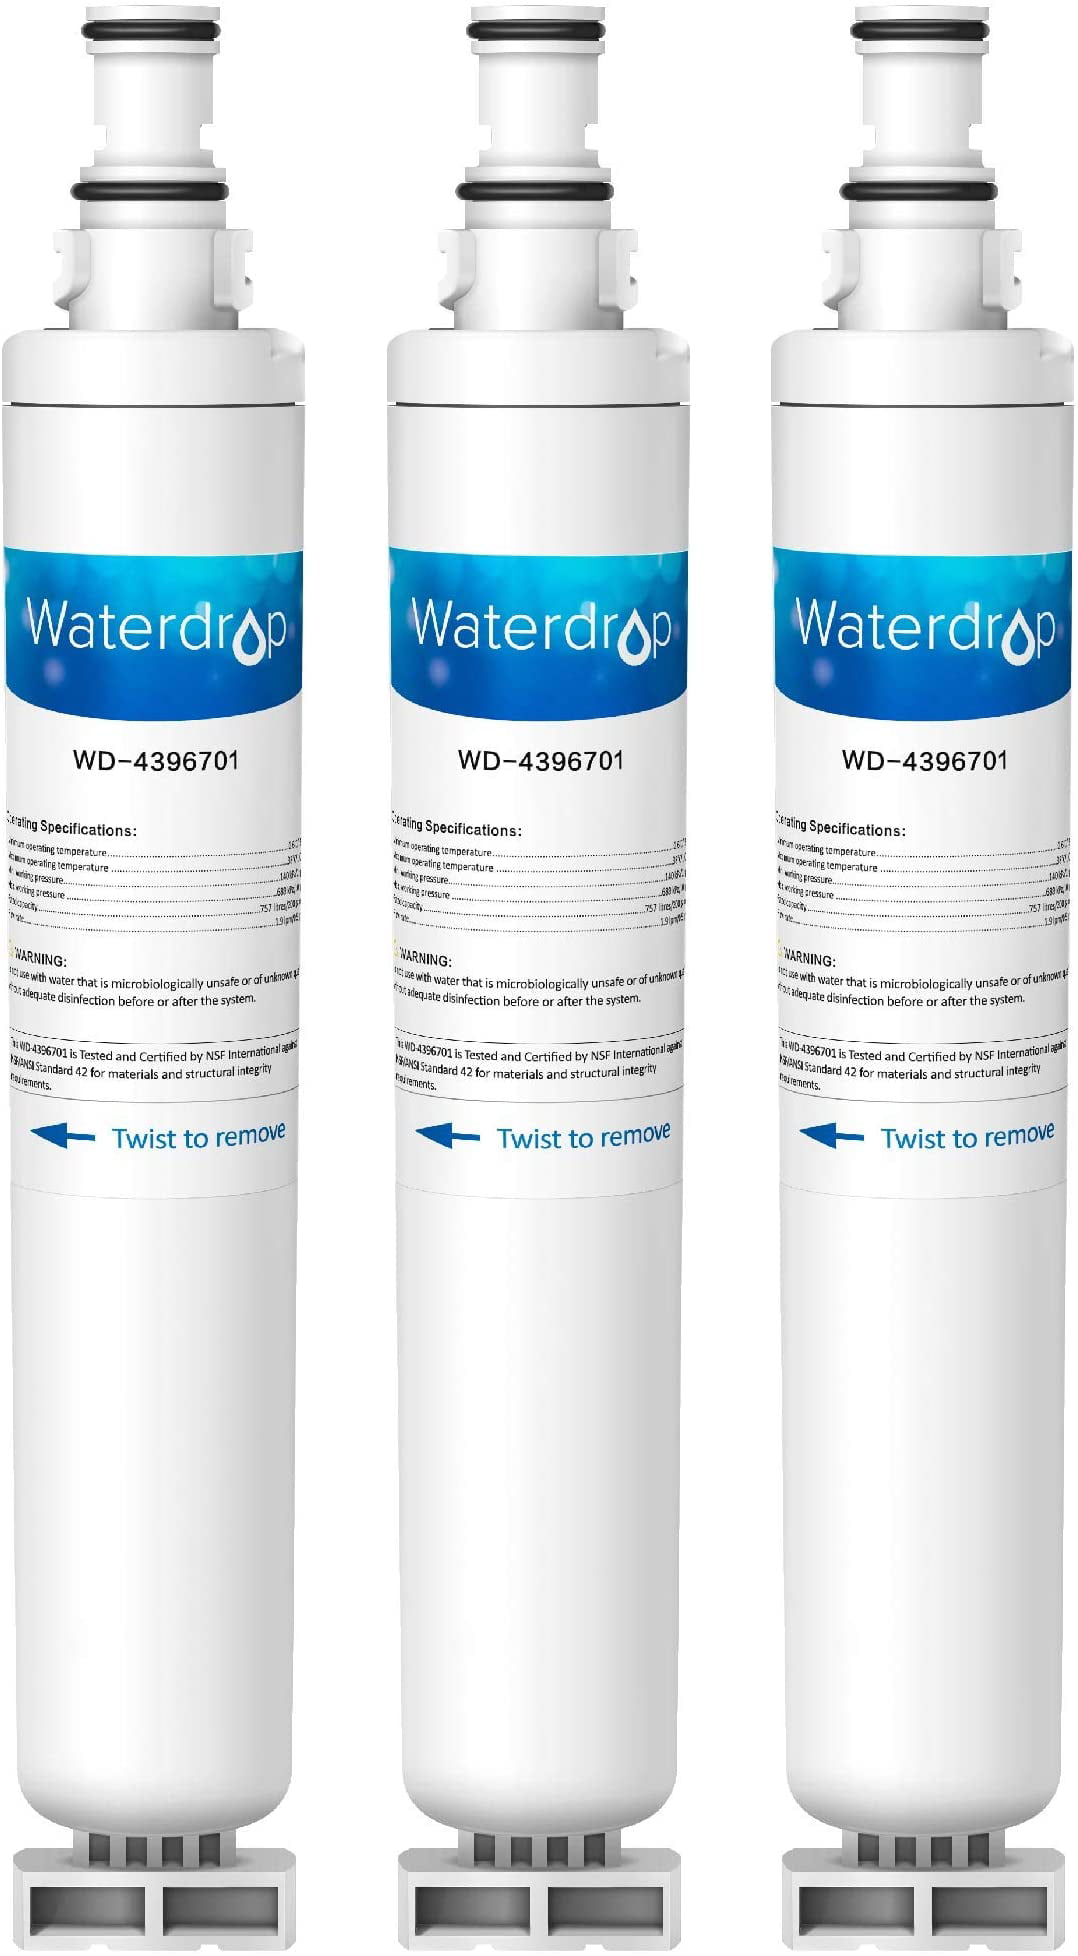 2X Kenmore 46-9915 Whirlpool 4396701 EDR6D1 Compatible Refrigerator Water Filter 